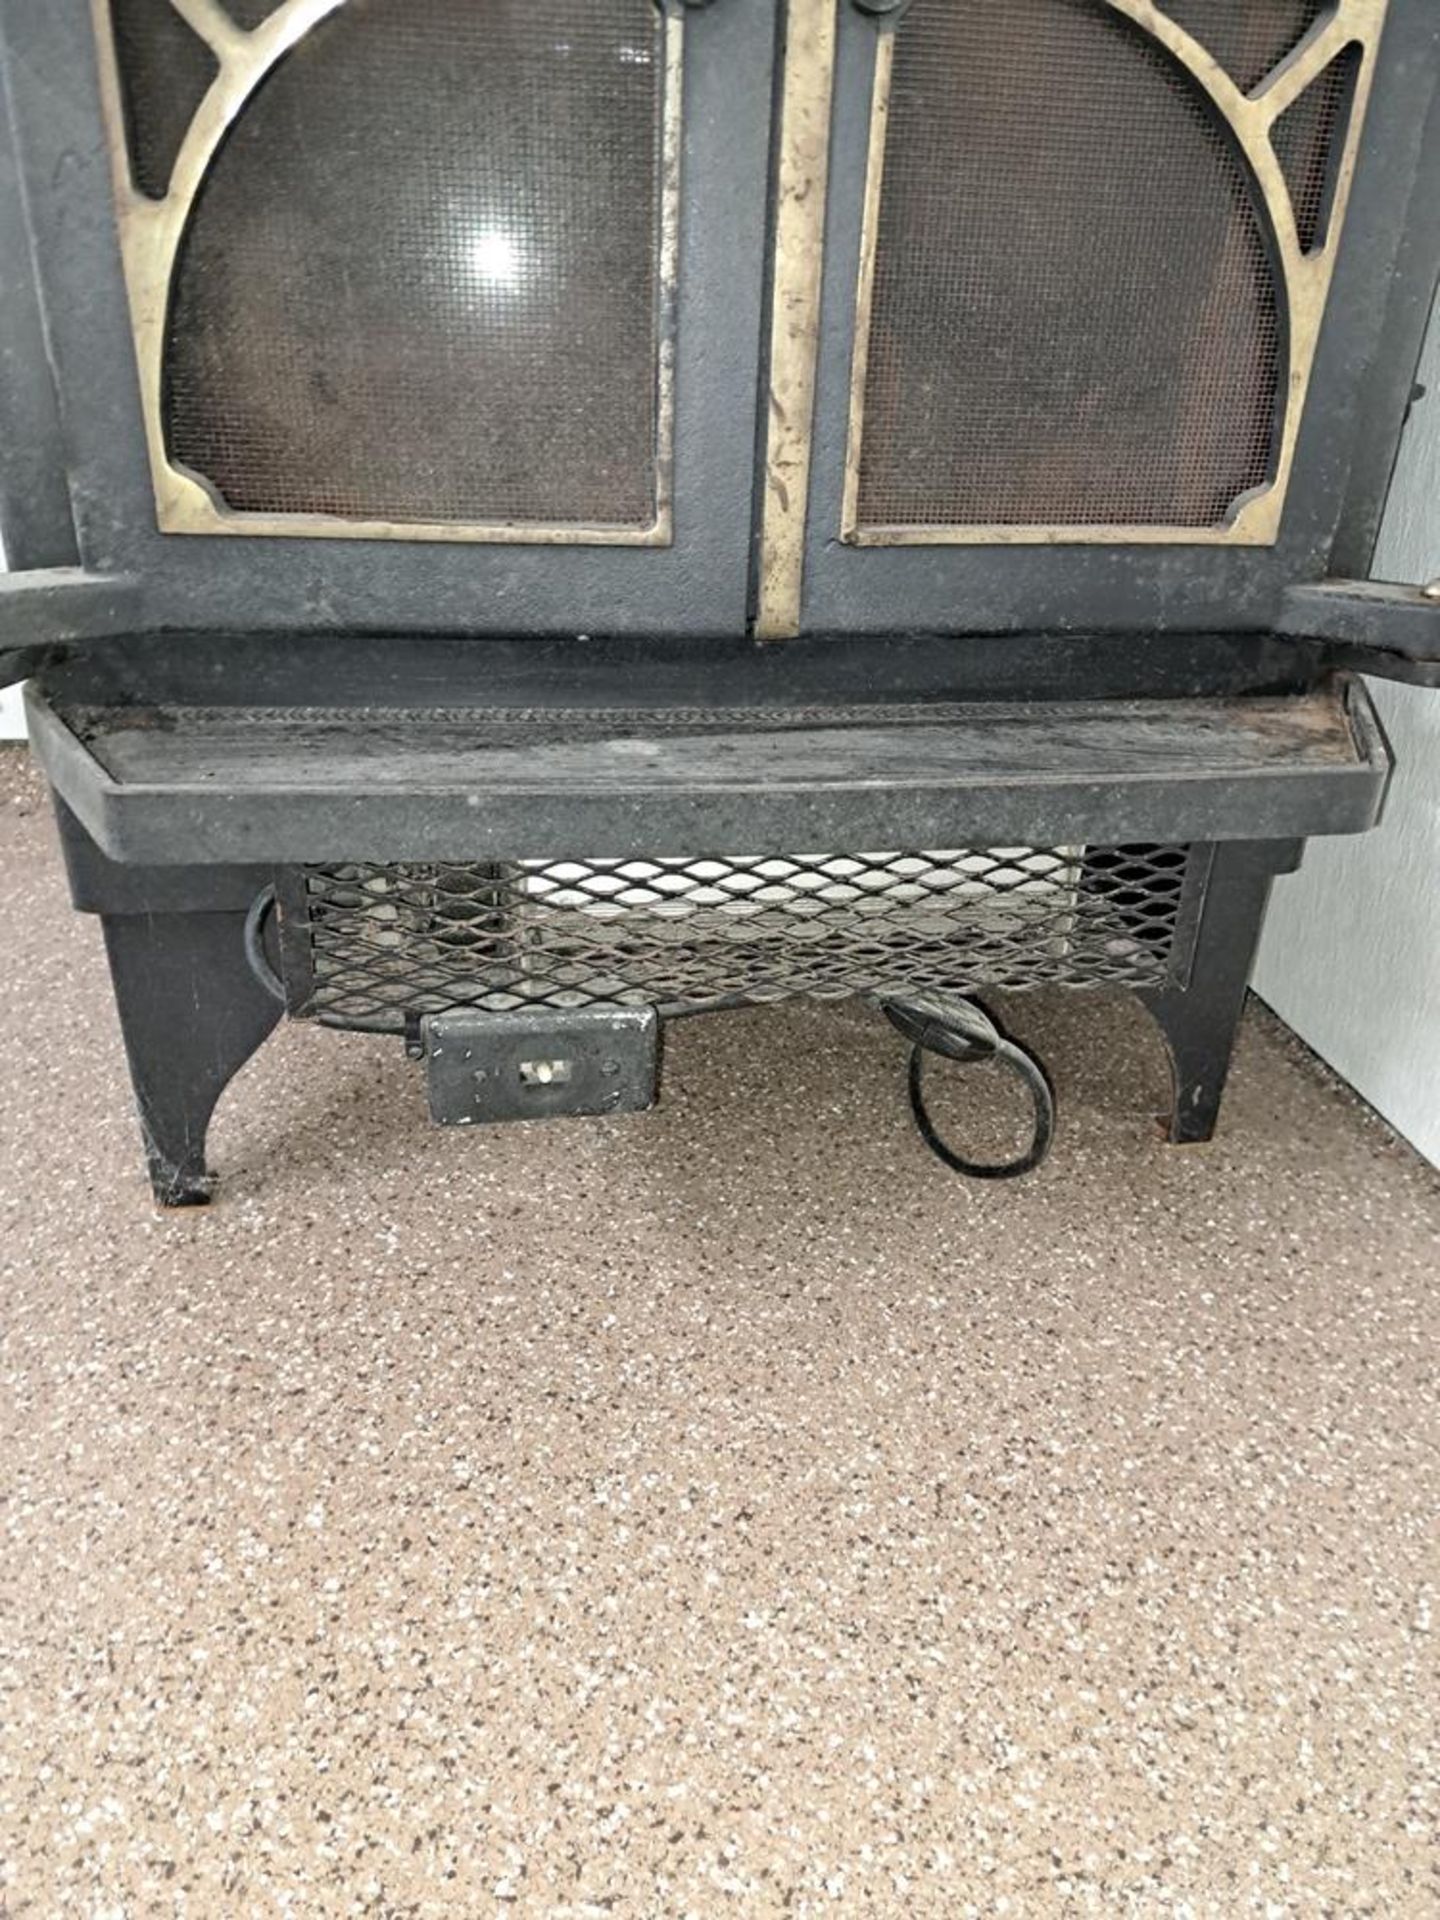 Wood Burning Stove, 30" wide X 32" deep X 36" tall (Required Loading Fee: $50.00) NO HAND CARRY ( - Bild 2 aus 4